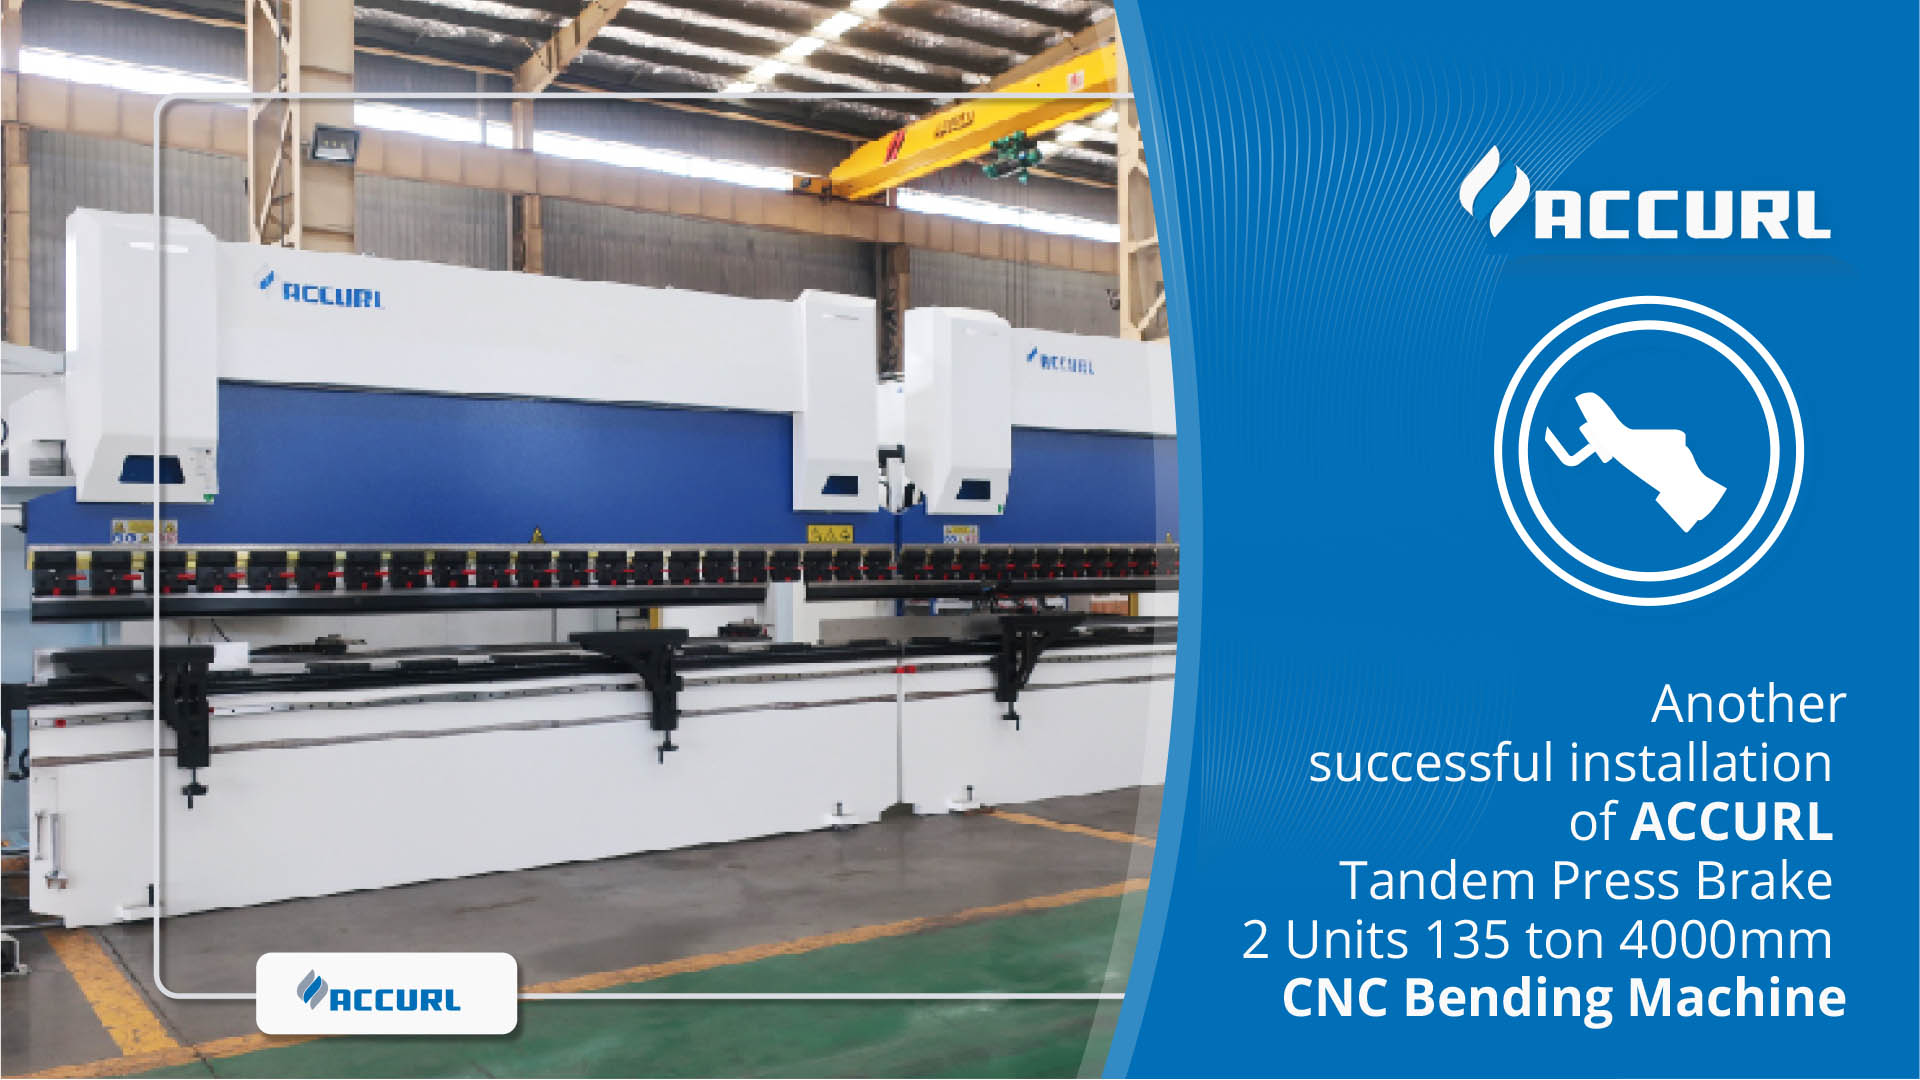 Another successful installation of ACCURL Tandem Press Brake 2 Units 135 ton 4000mm CNC Bending Machine